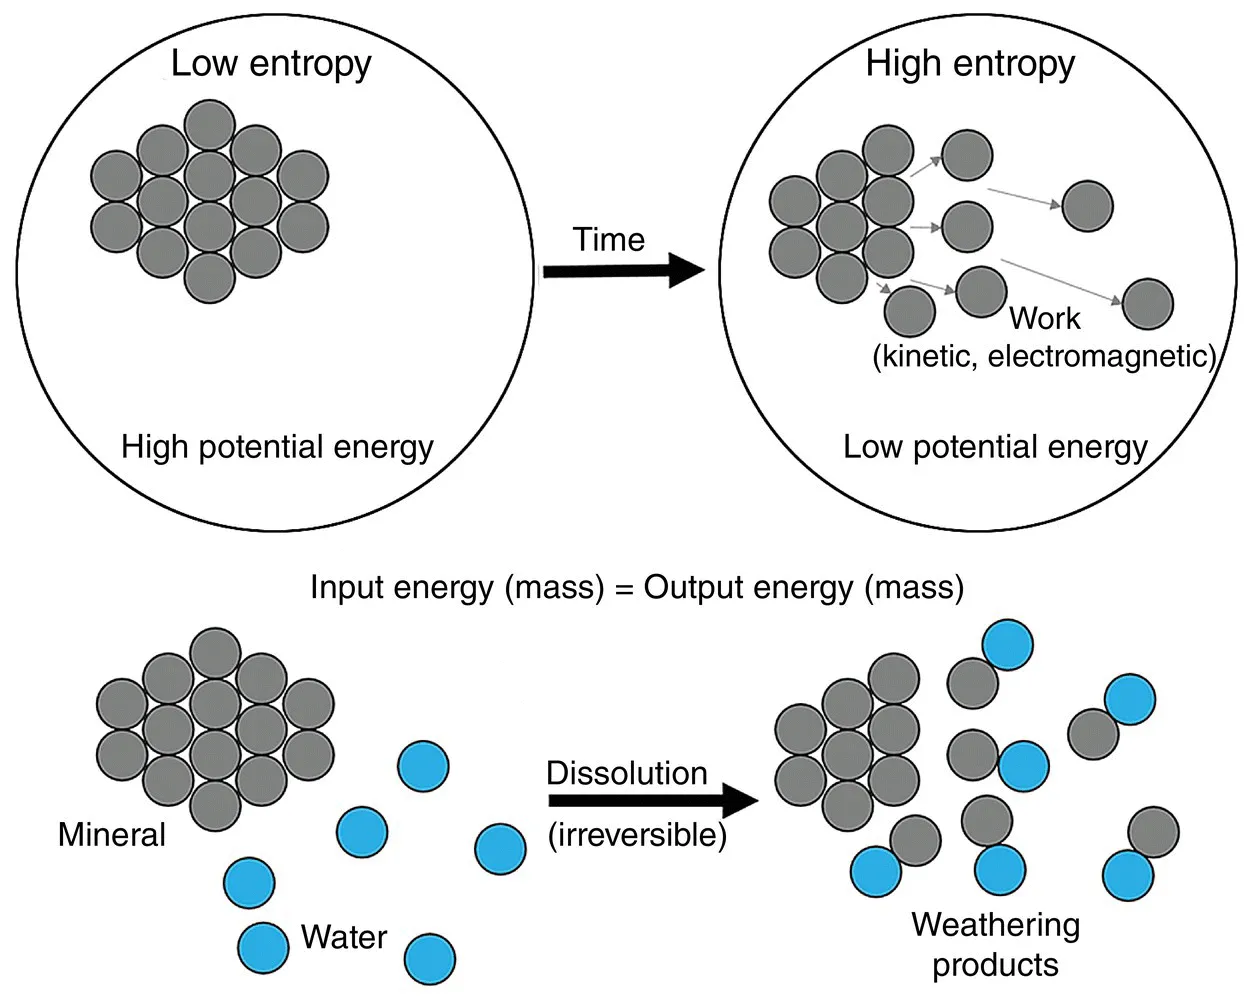 Schematic illustrating the principle of entropy in a theoretical, closed system, and how it applies to open-system natural processes, such as weathering.